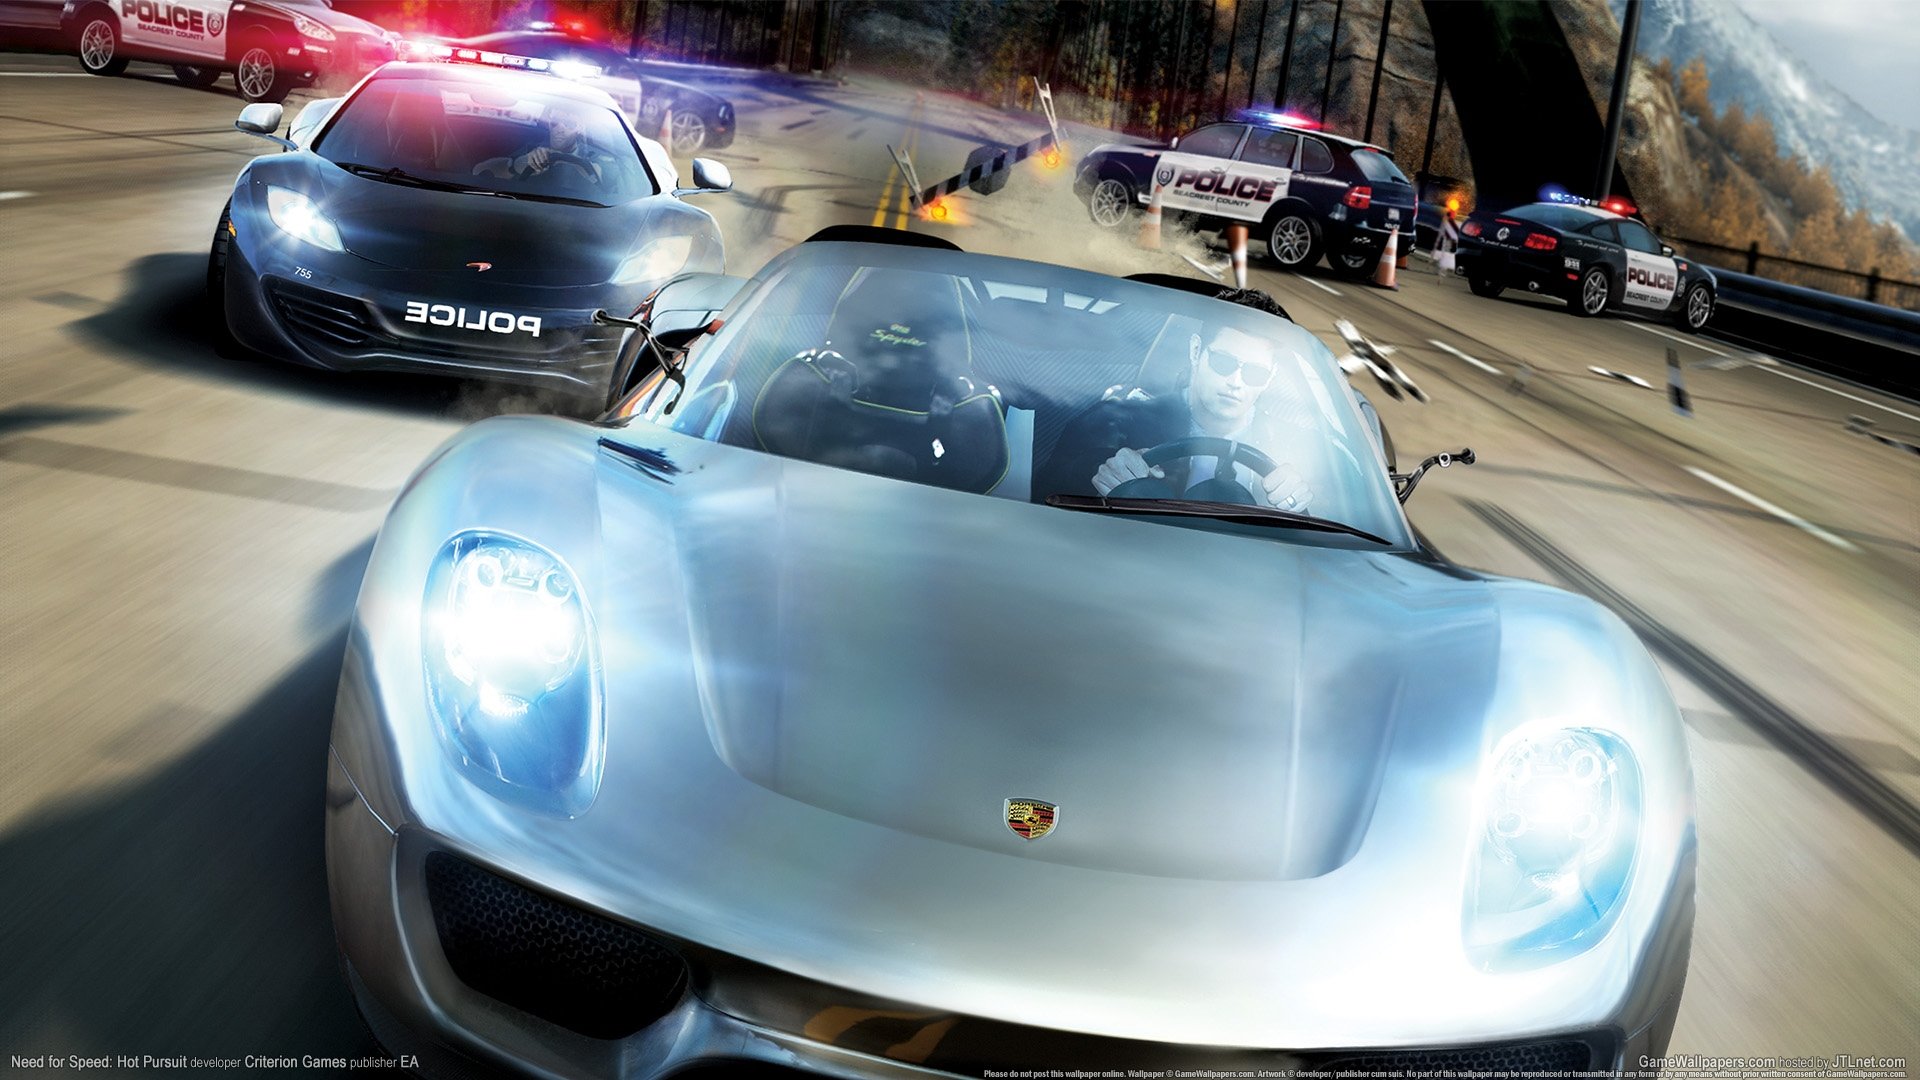 Best Need For Speed: Hot Pursuit wallpaper ID:256255 for High Resolution full hd 1080p PC